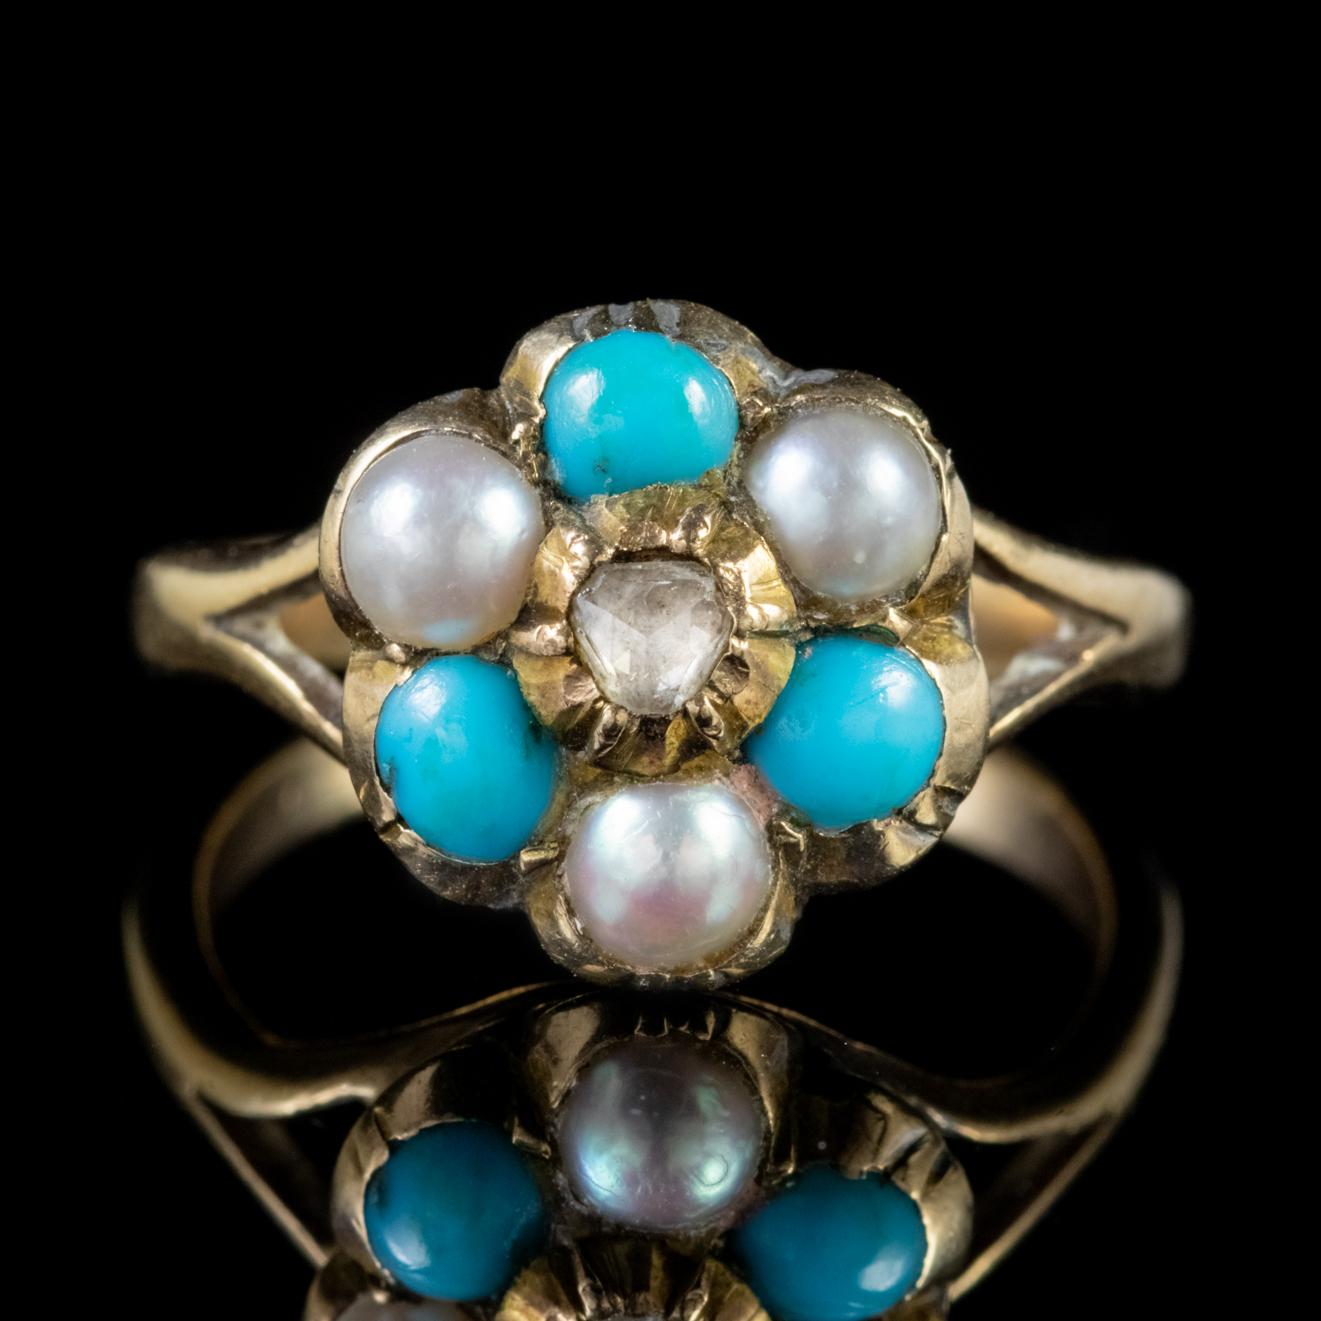 An exquisite Antique cluster ring adorned with Pearls and Turquoise stones arranged in a lovely flower shaped cluster with a Rose cut Diamond twinkling in the centre. 

Turquoise are a lovely opaque stone with a calming blue/ green colour and have